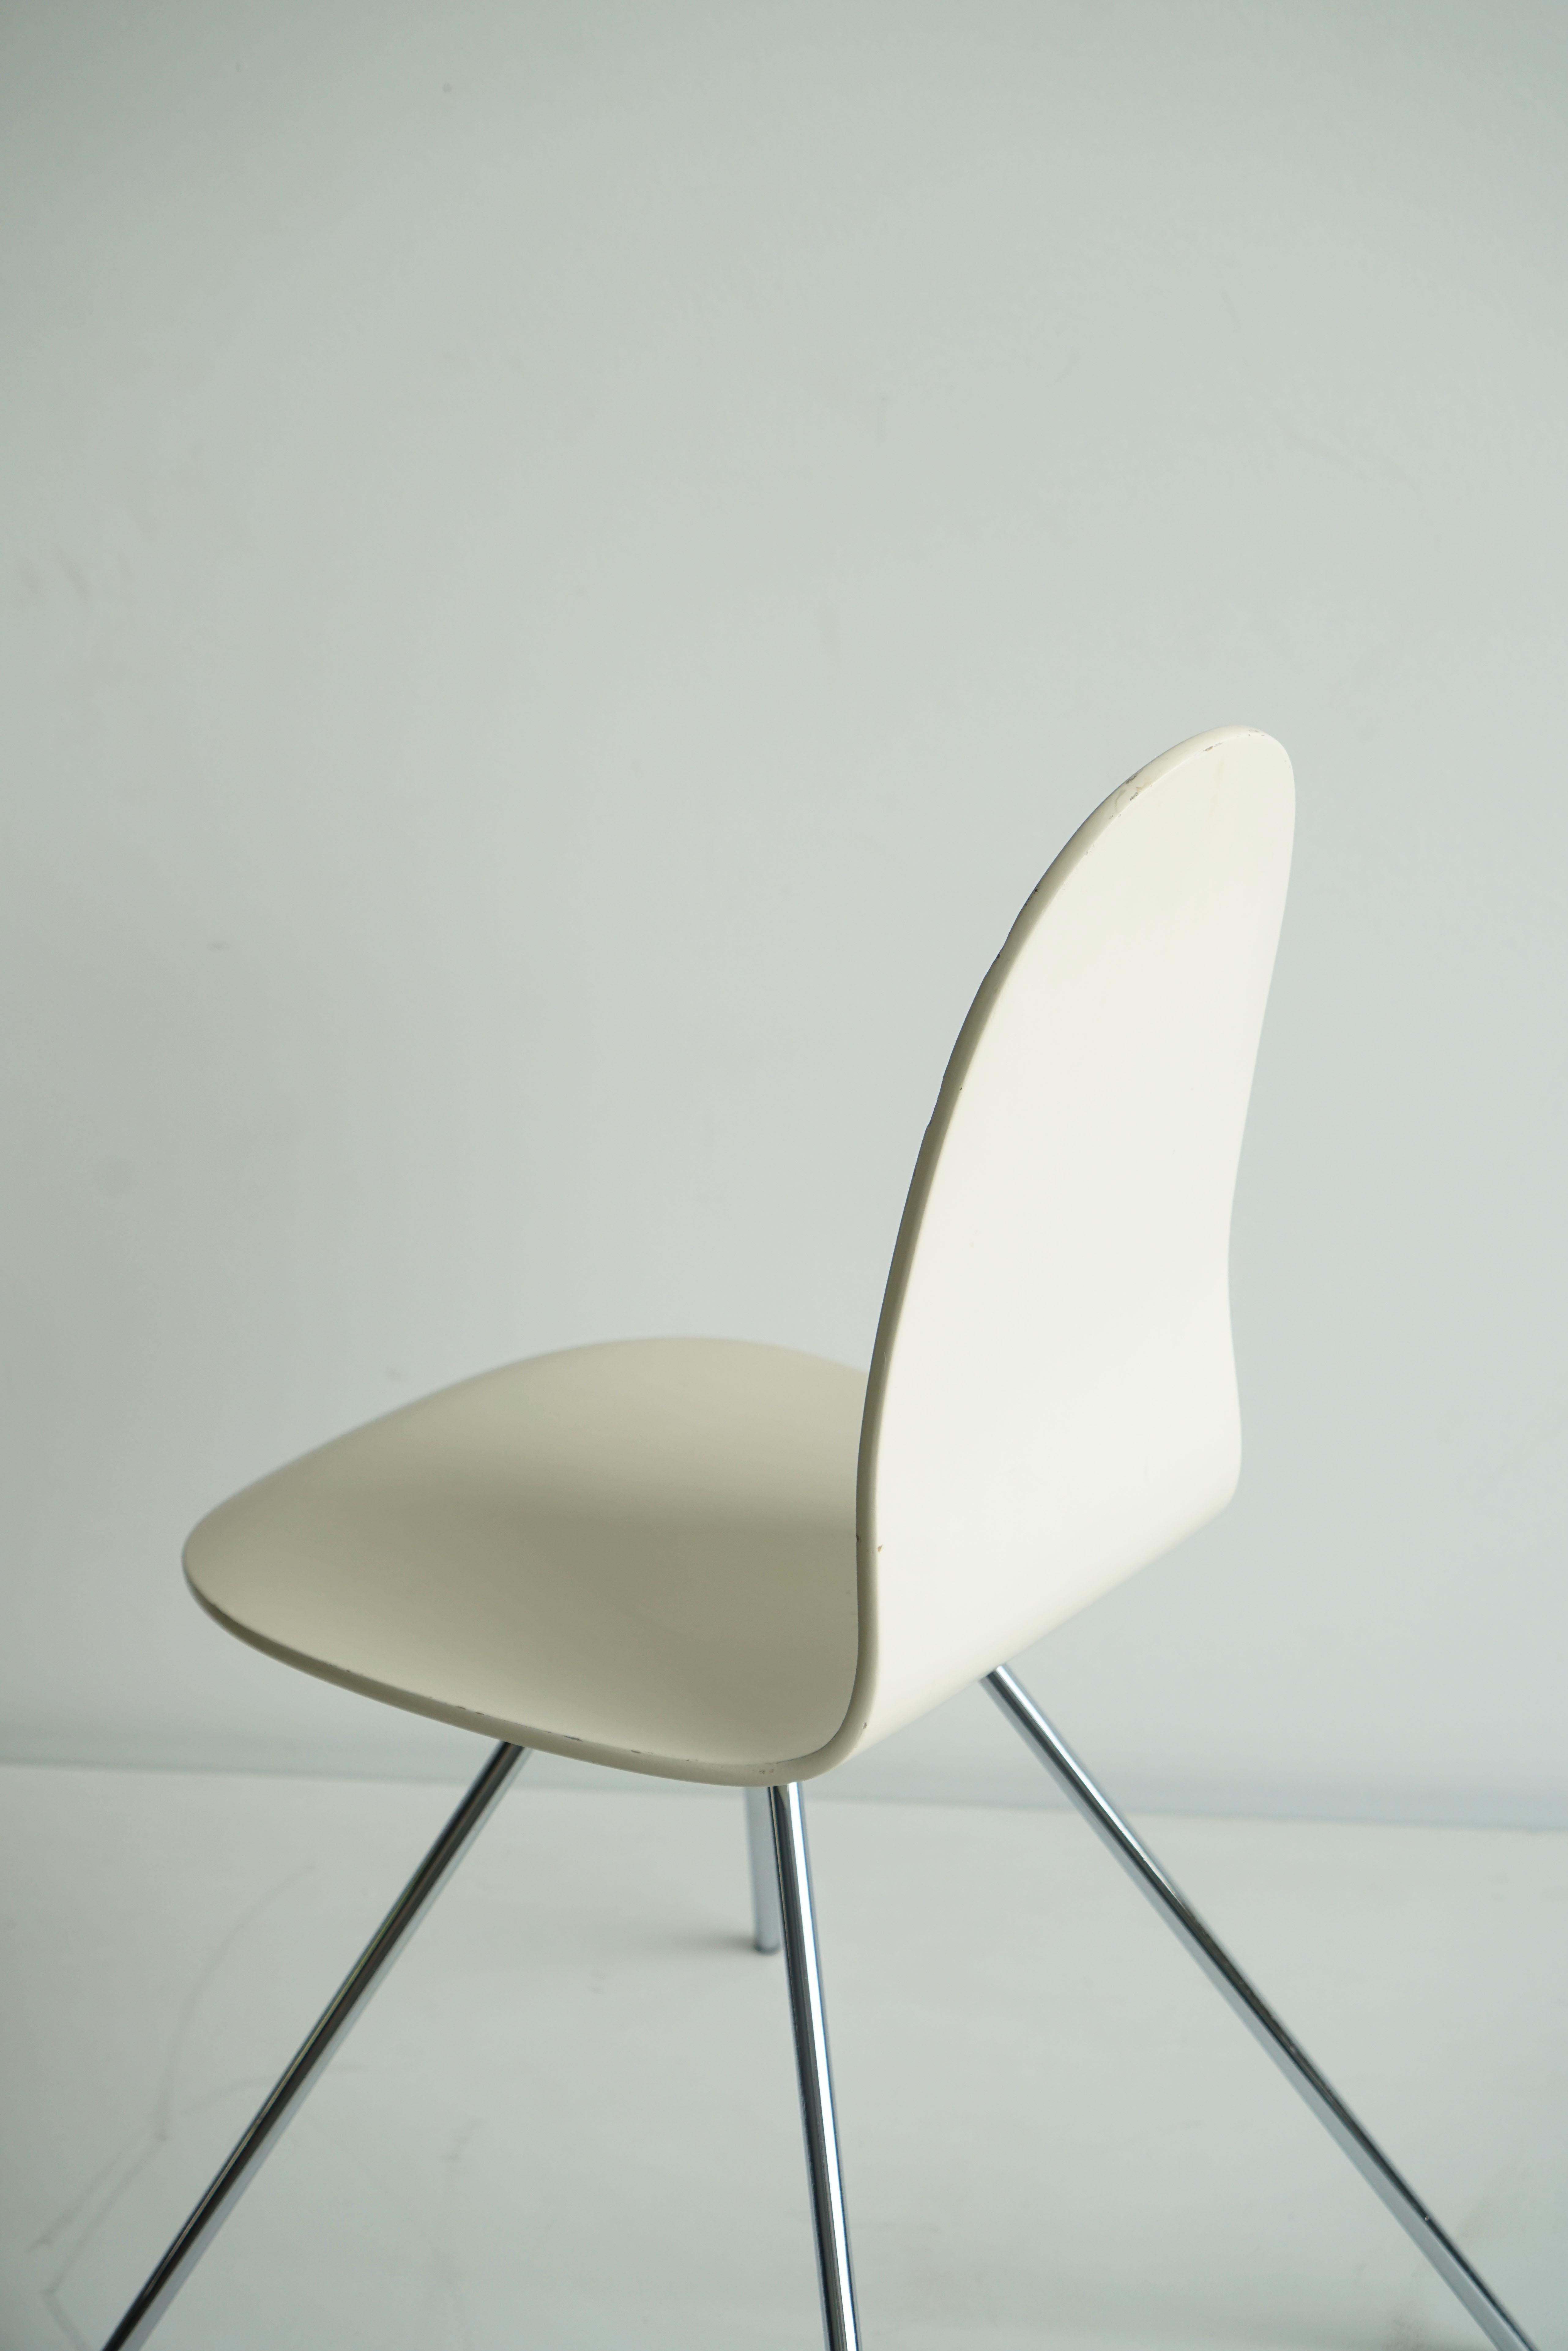 Pair of Arne Jacobsen Tongue chairs by Fritz Hansen circa 1965 In Good Condition For Sale In Chicago, IL